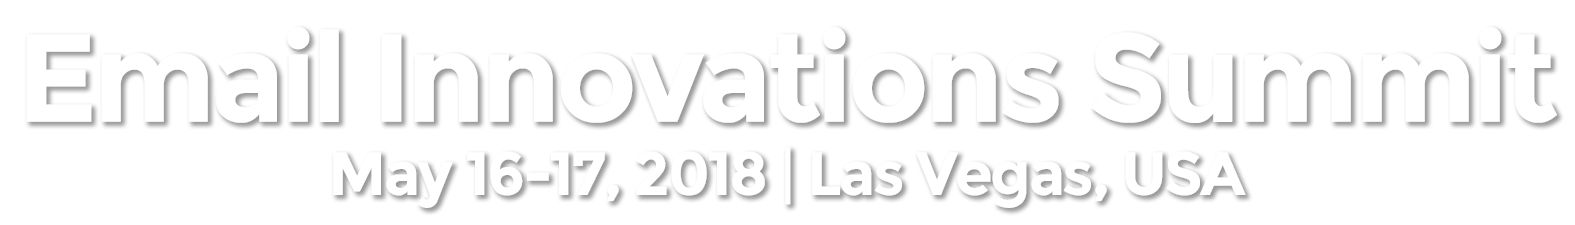 Email Innovations Summit: Las Vegas / April 19-21, 2017 / The Rio Suites Hotel